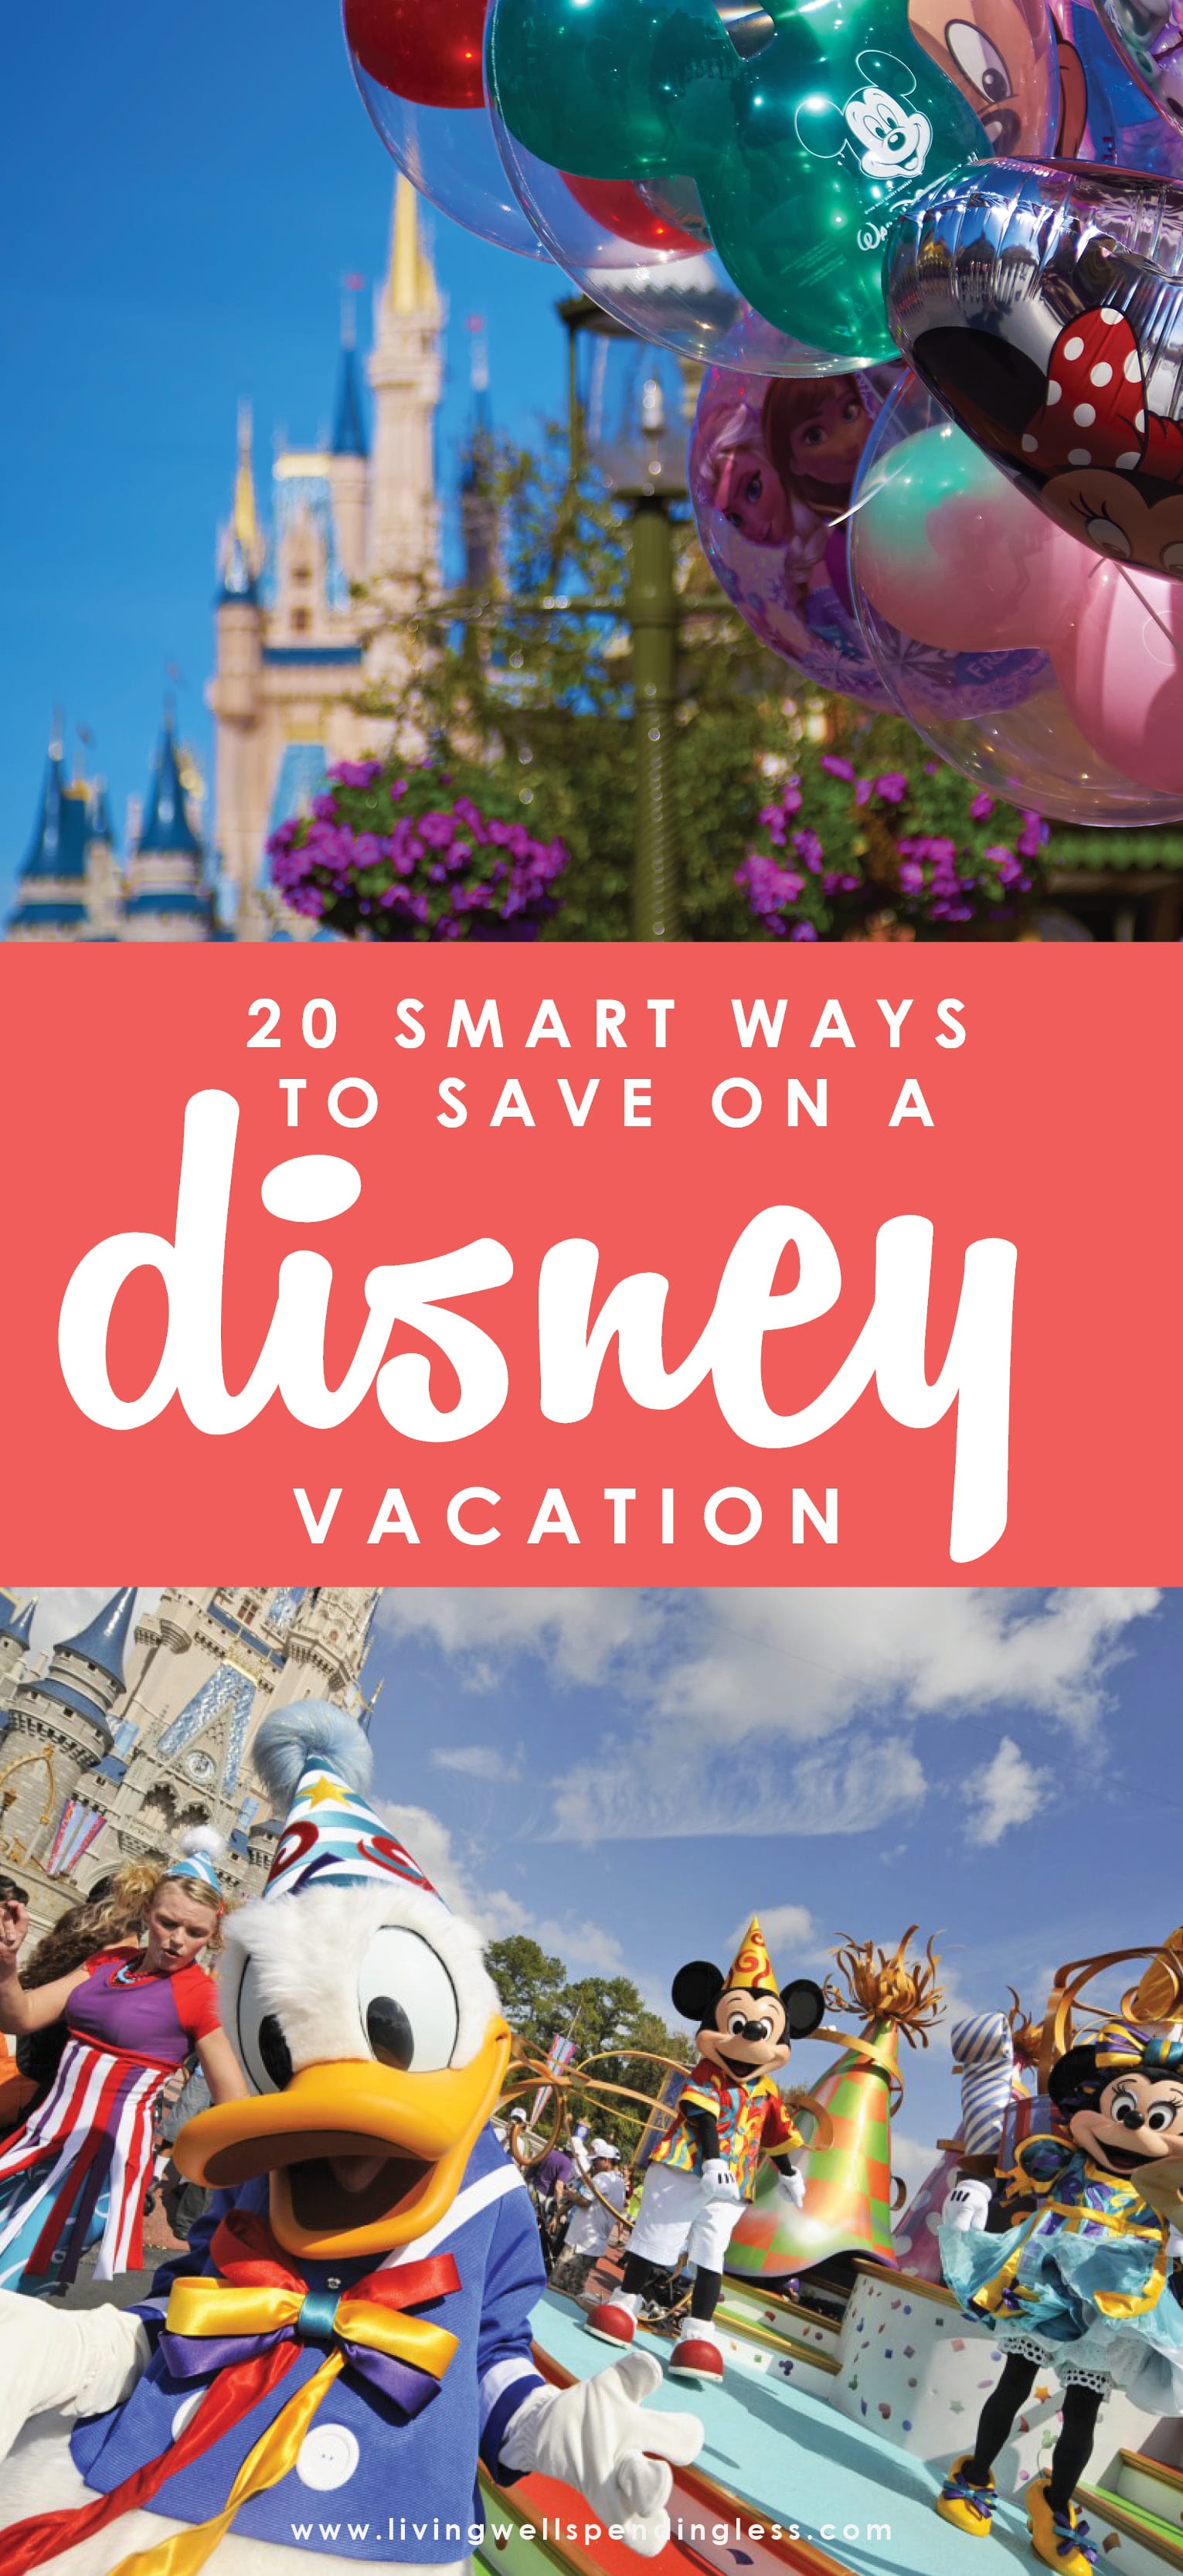 20 Smart Ways to Save on a Disney Vacation  Save at Disney